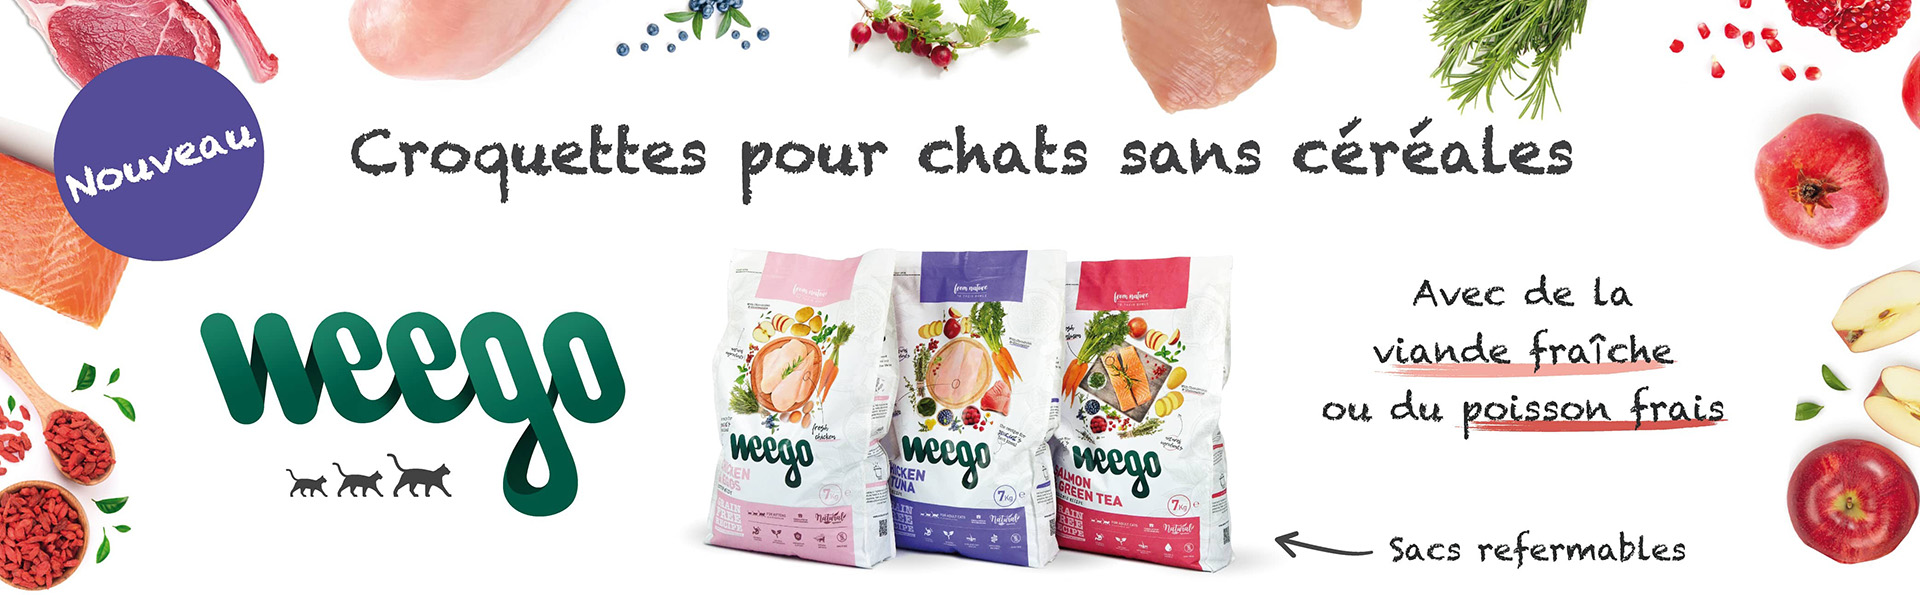 croquettes-weego-chat-3-compressor